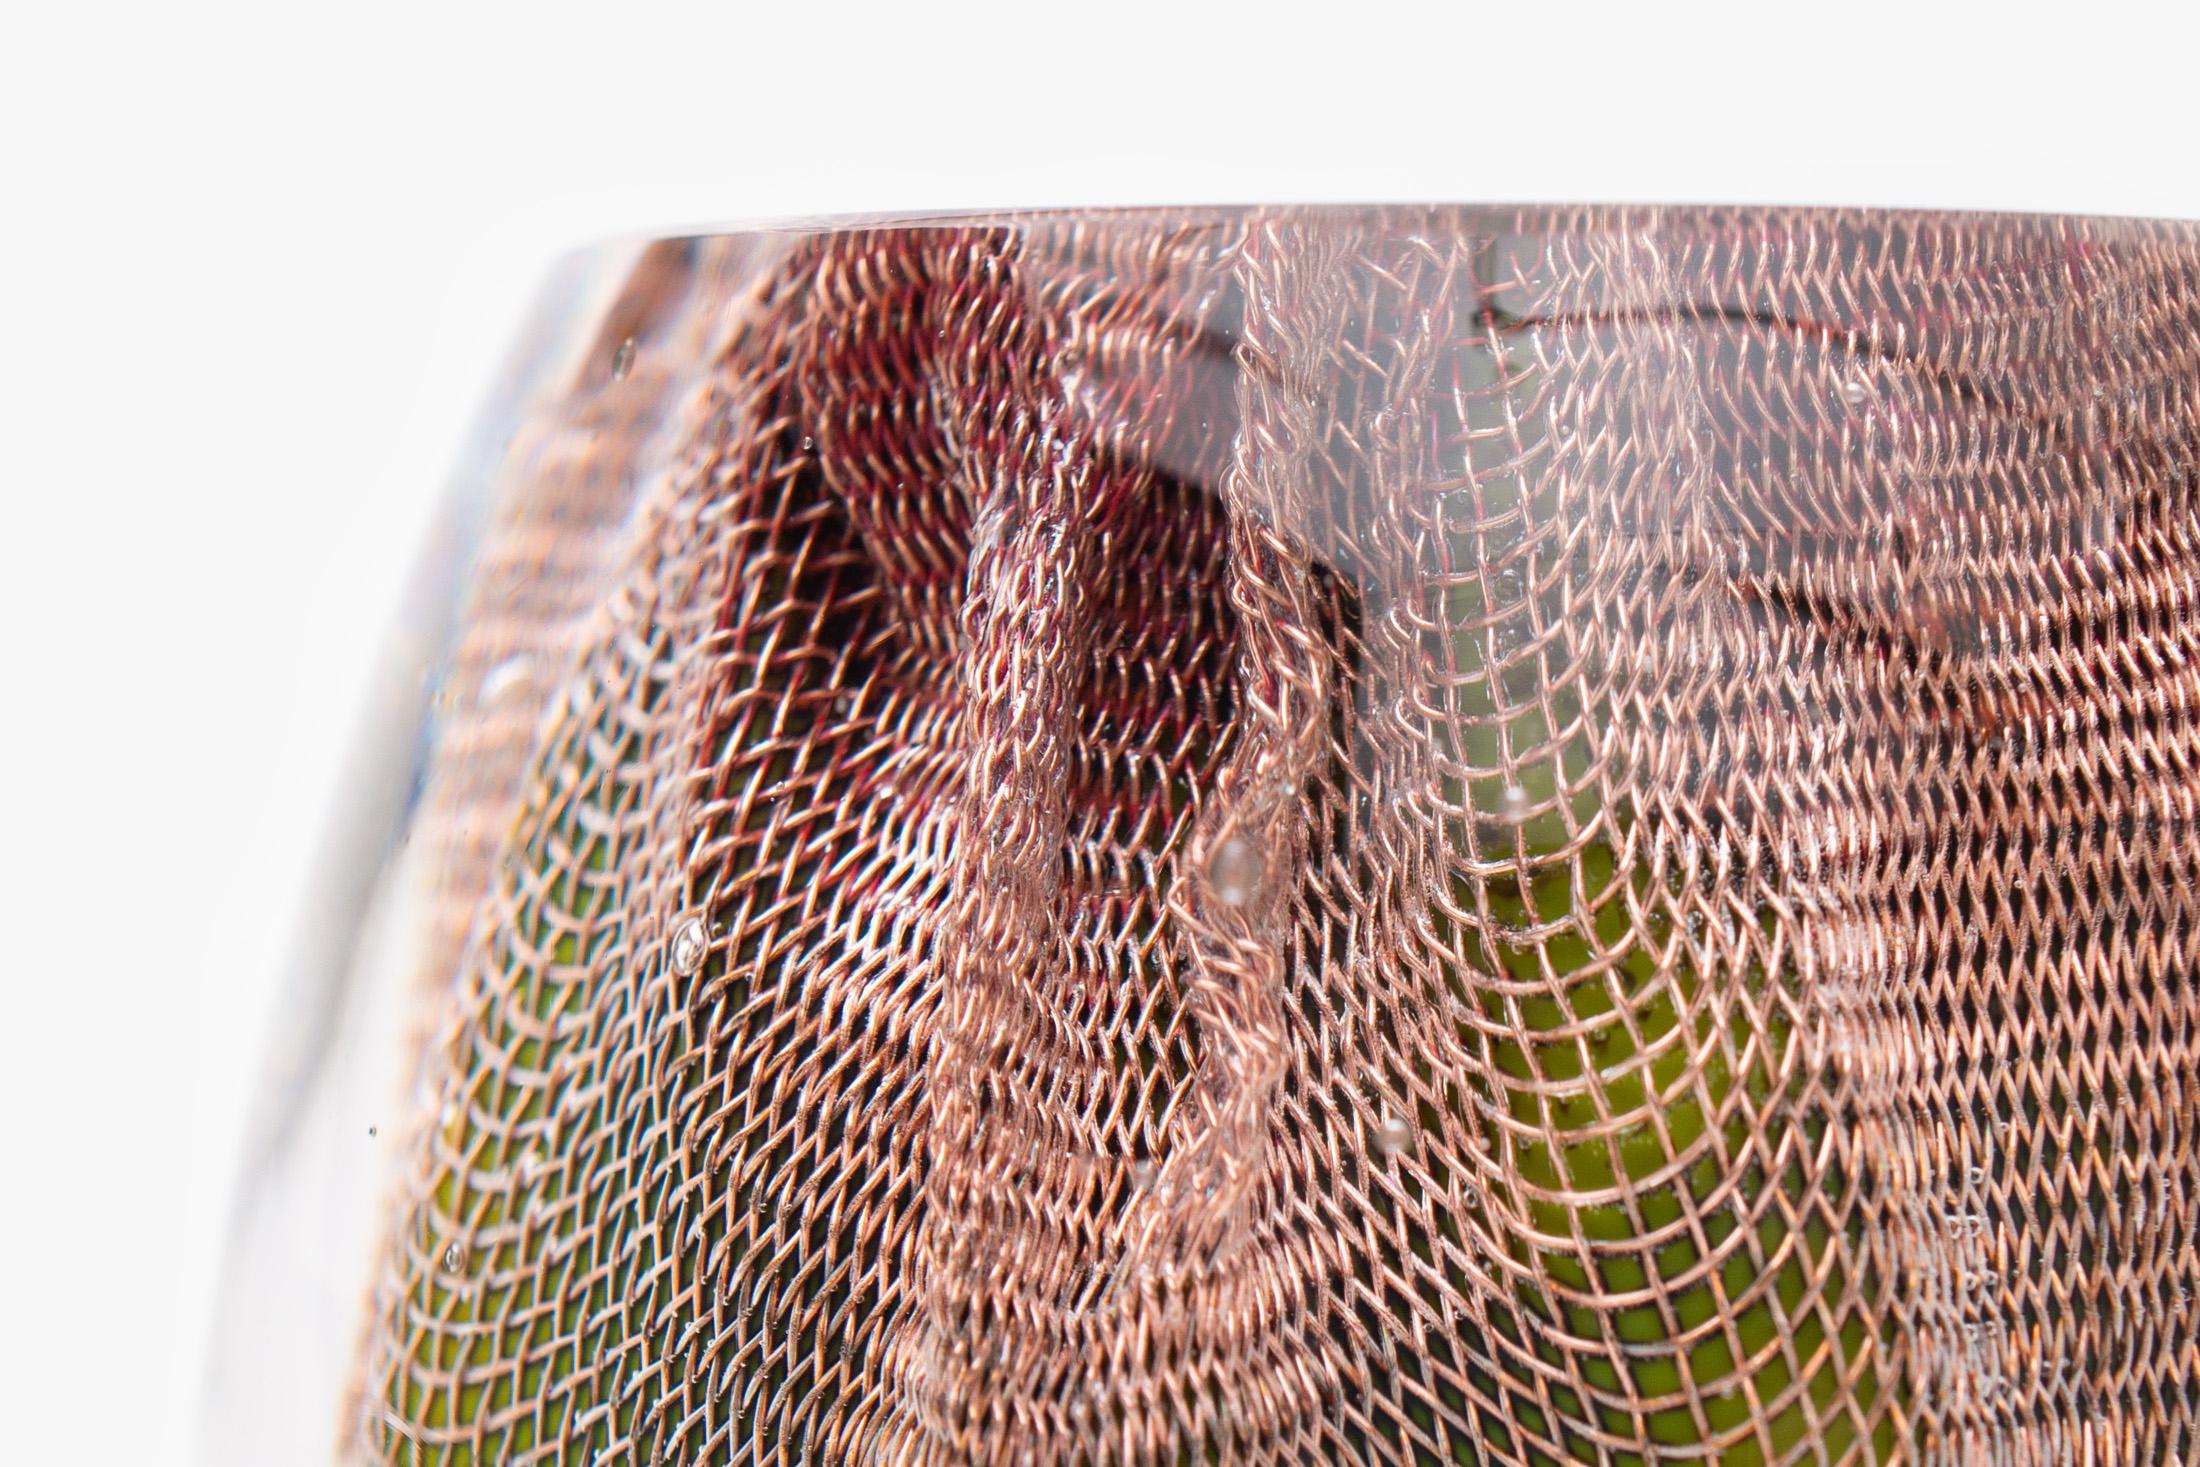 Glass and Copper Mesh Vase by Omer Arbel for OAO Works, Green im Zustand „Neu“ in Vancouver, British Columbia